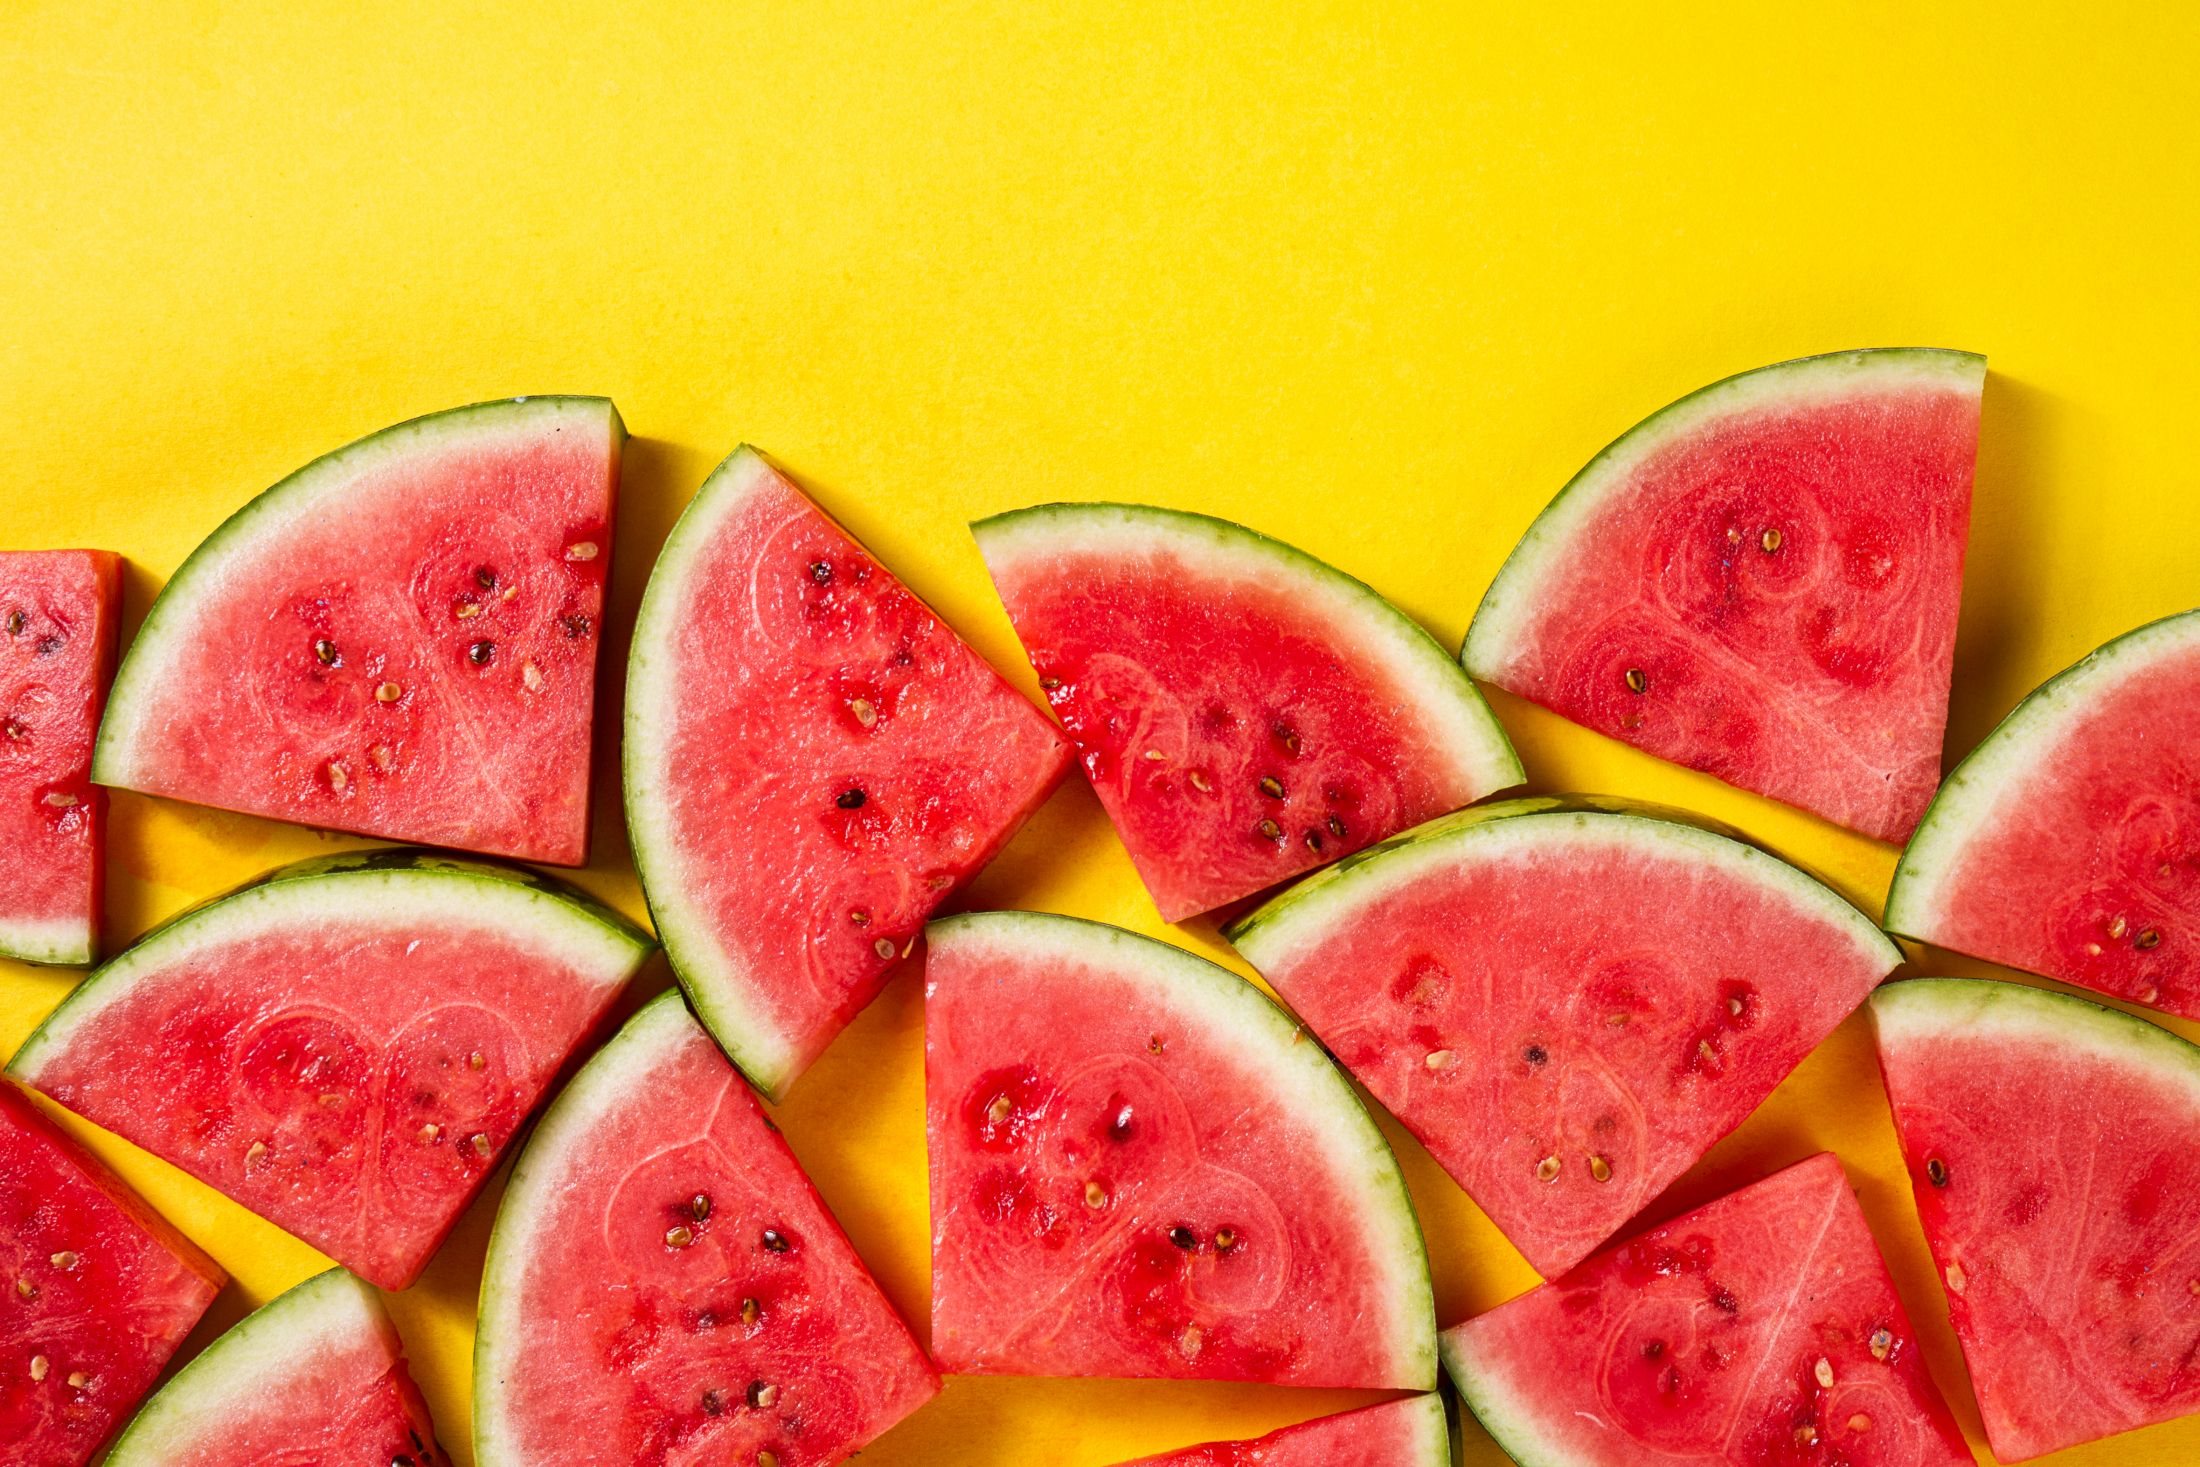 beautiful-pattern-with-fresh-watermelon-slices-on-yellow-bright-background-top-view-copy-space.jpg